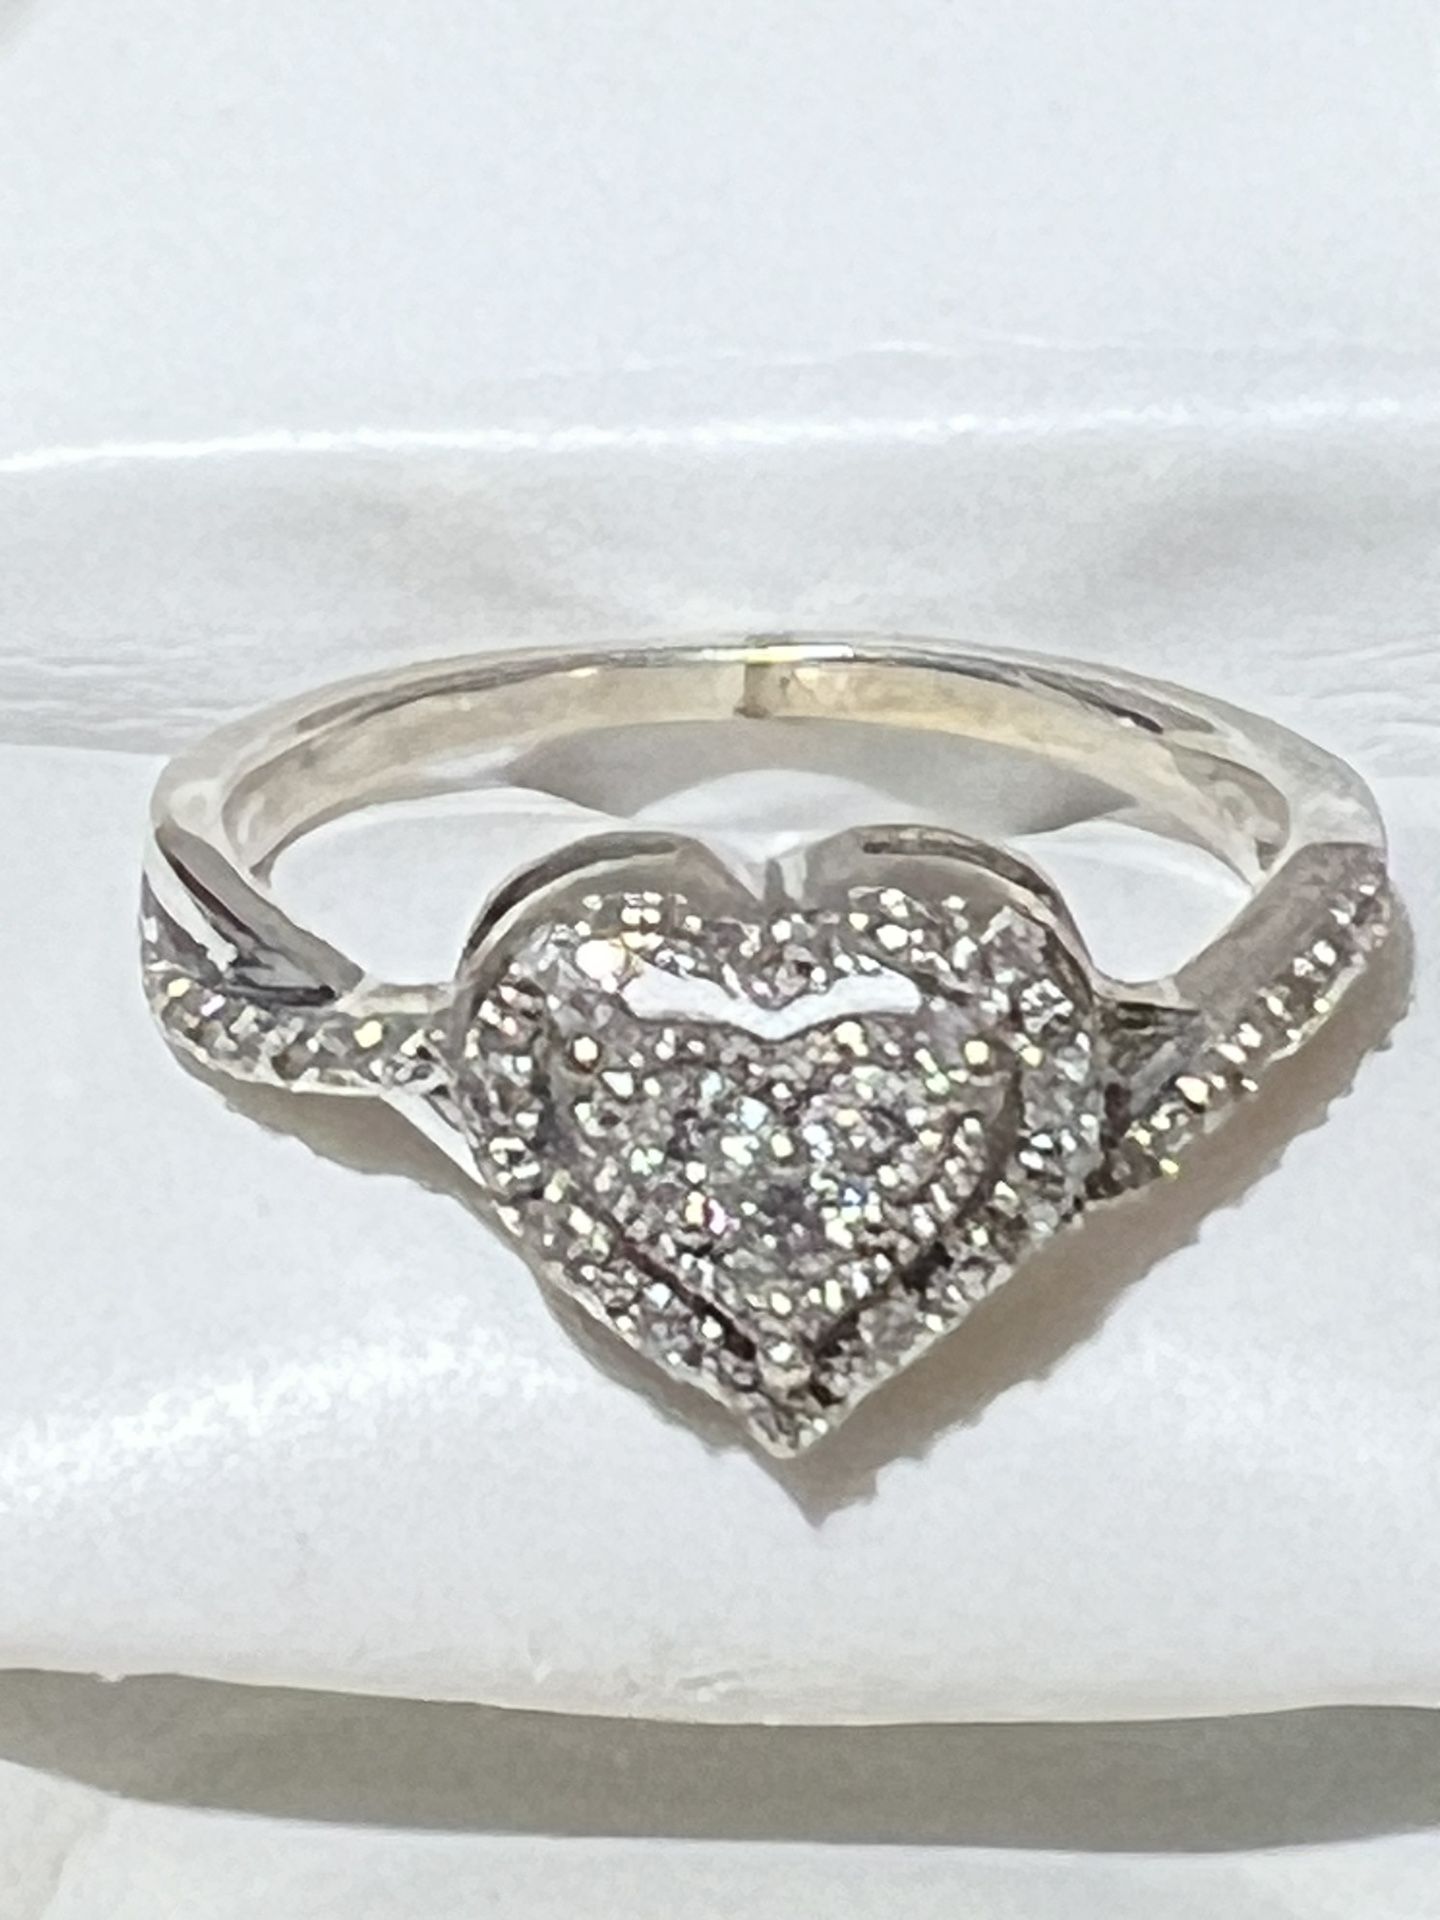 BEAUTIFUL PURE STERLING SILVER WITH REAL DIAMONDS HEART RING SIZE 7.5 